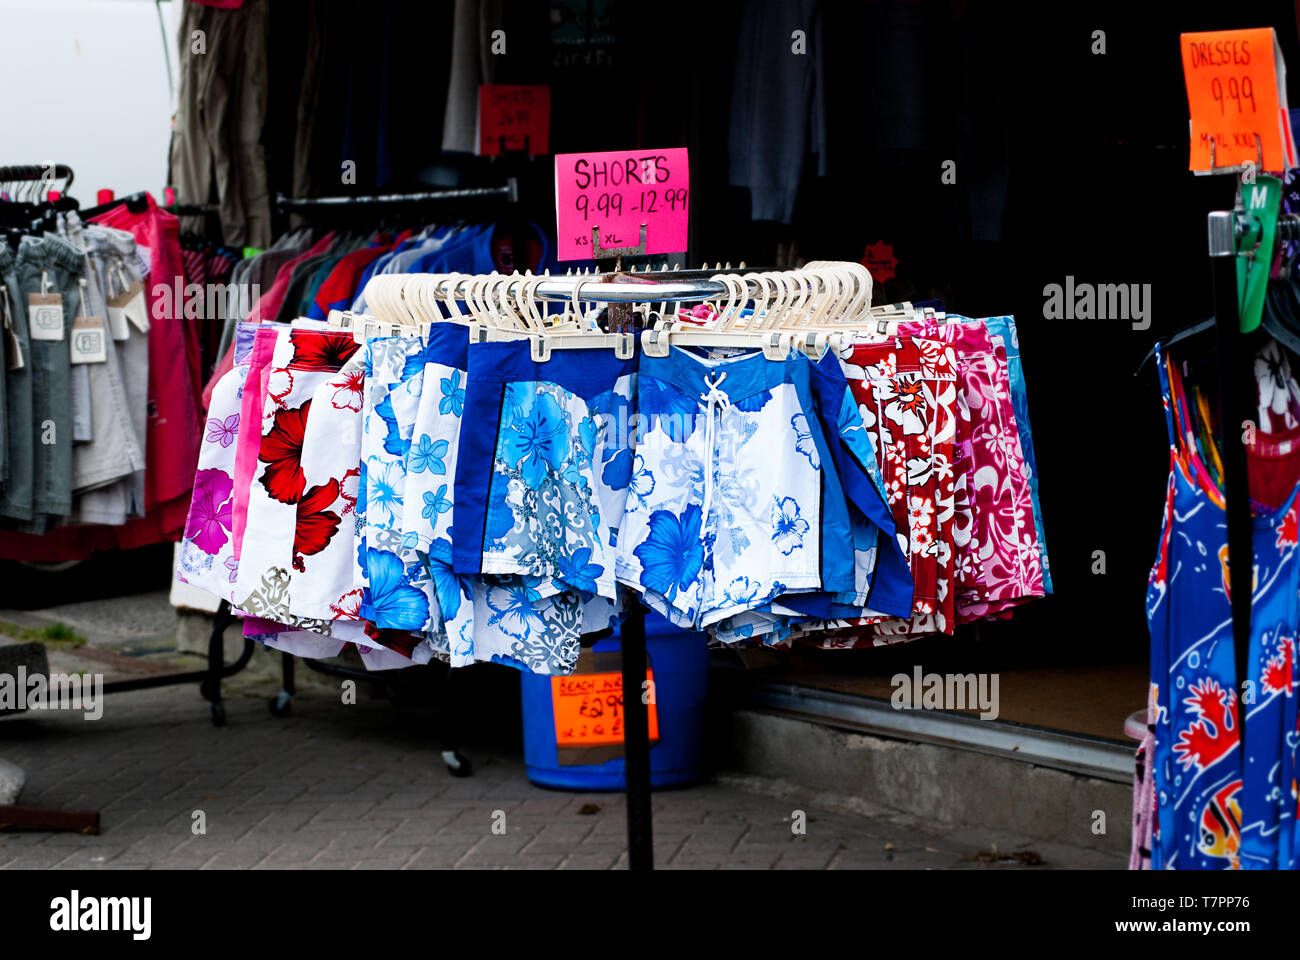 Beach shorts for sale on a stand in Perranporth, Cornwall. Stock Photo